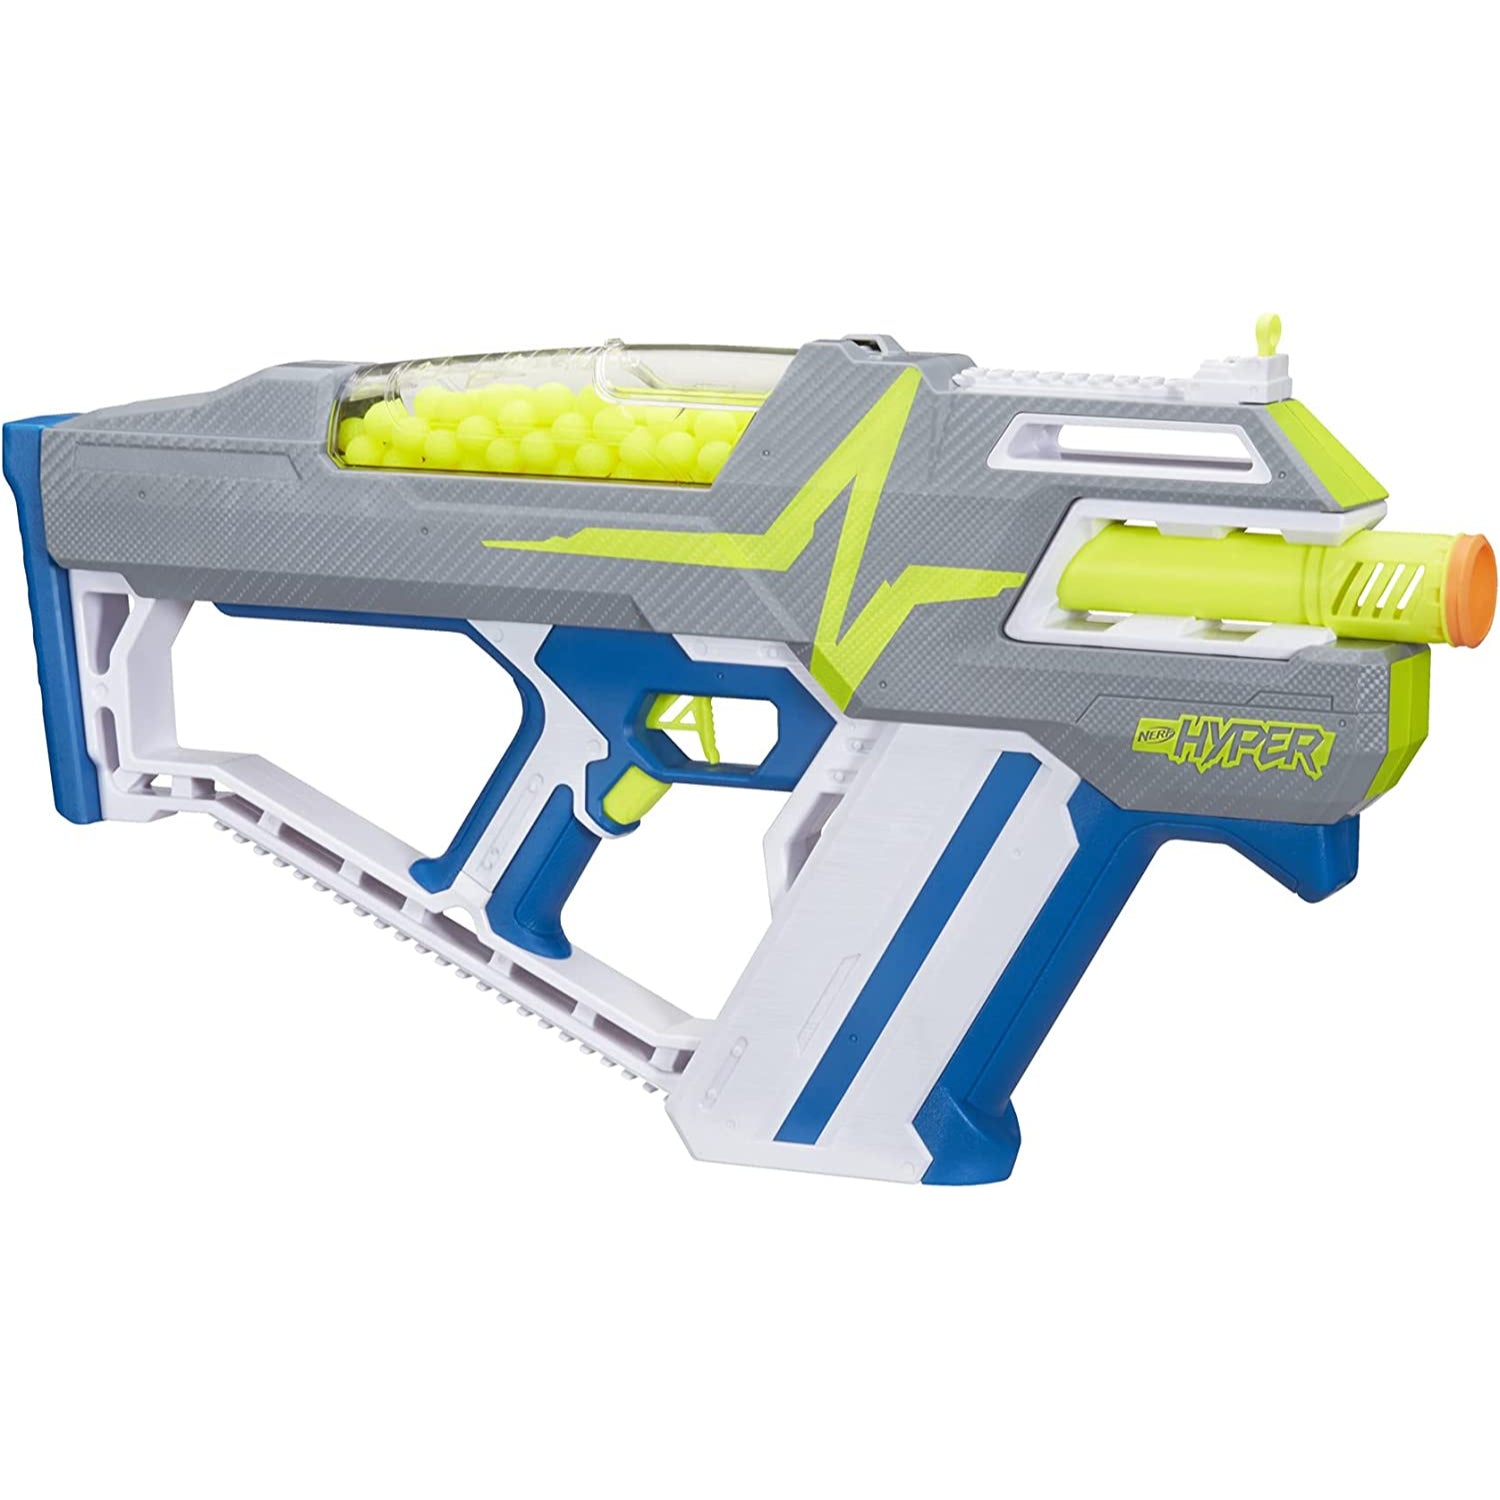 Nerf Ultra Amp Motorized Blaster, Kids Toy for Boys and Girls with 6 Darts